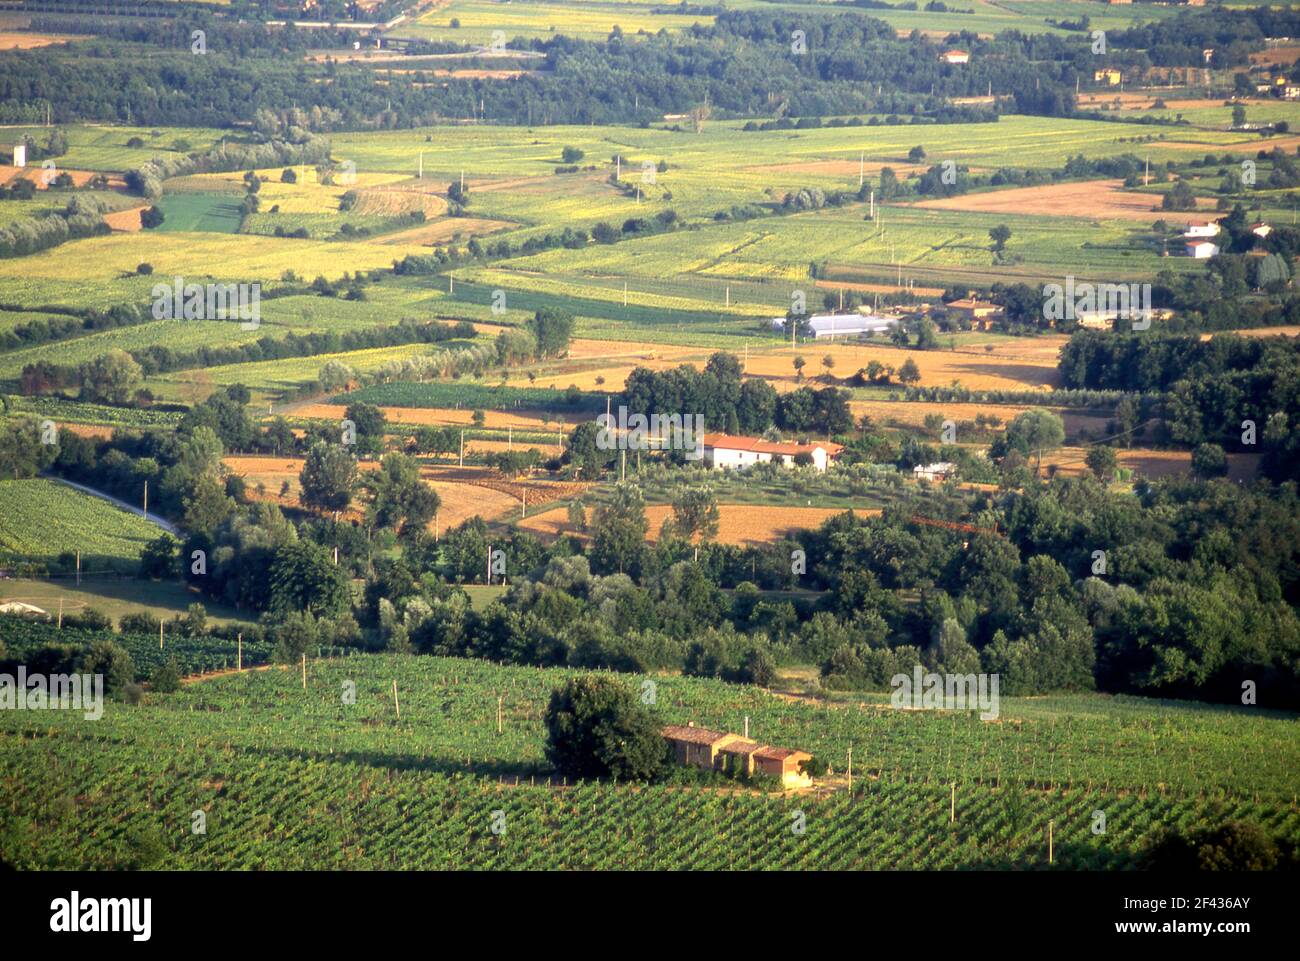 Agricultural landscape in the Valdarno region of Tuscany, Italy Stock Photo